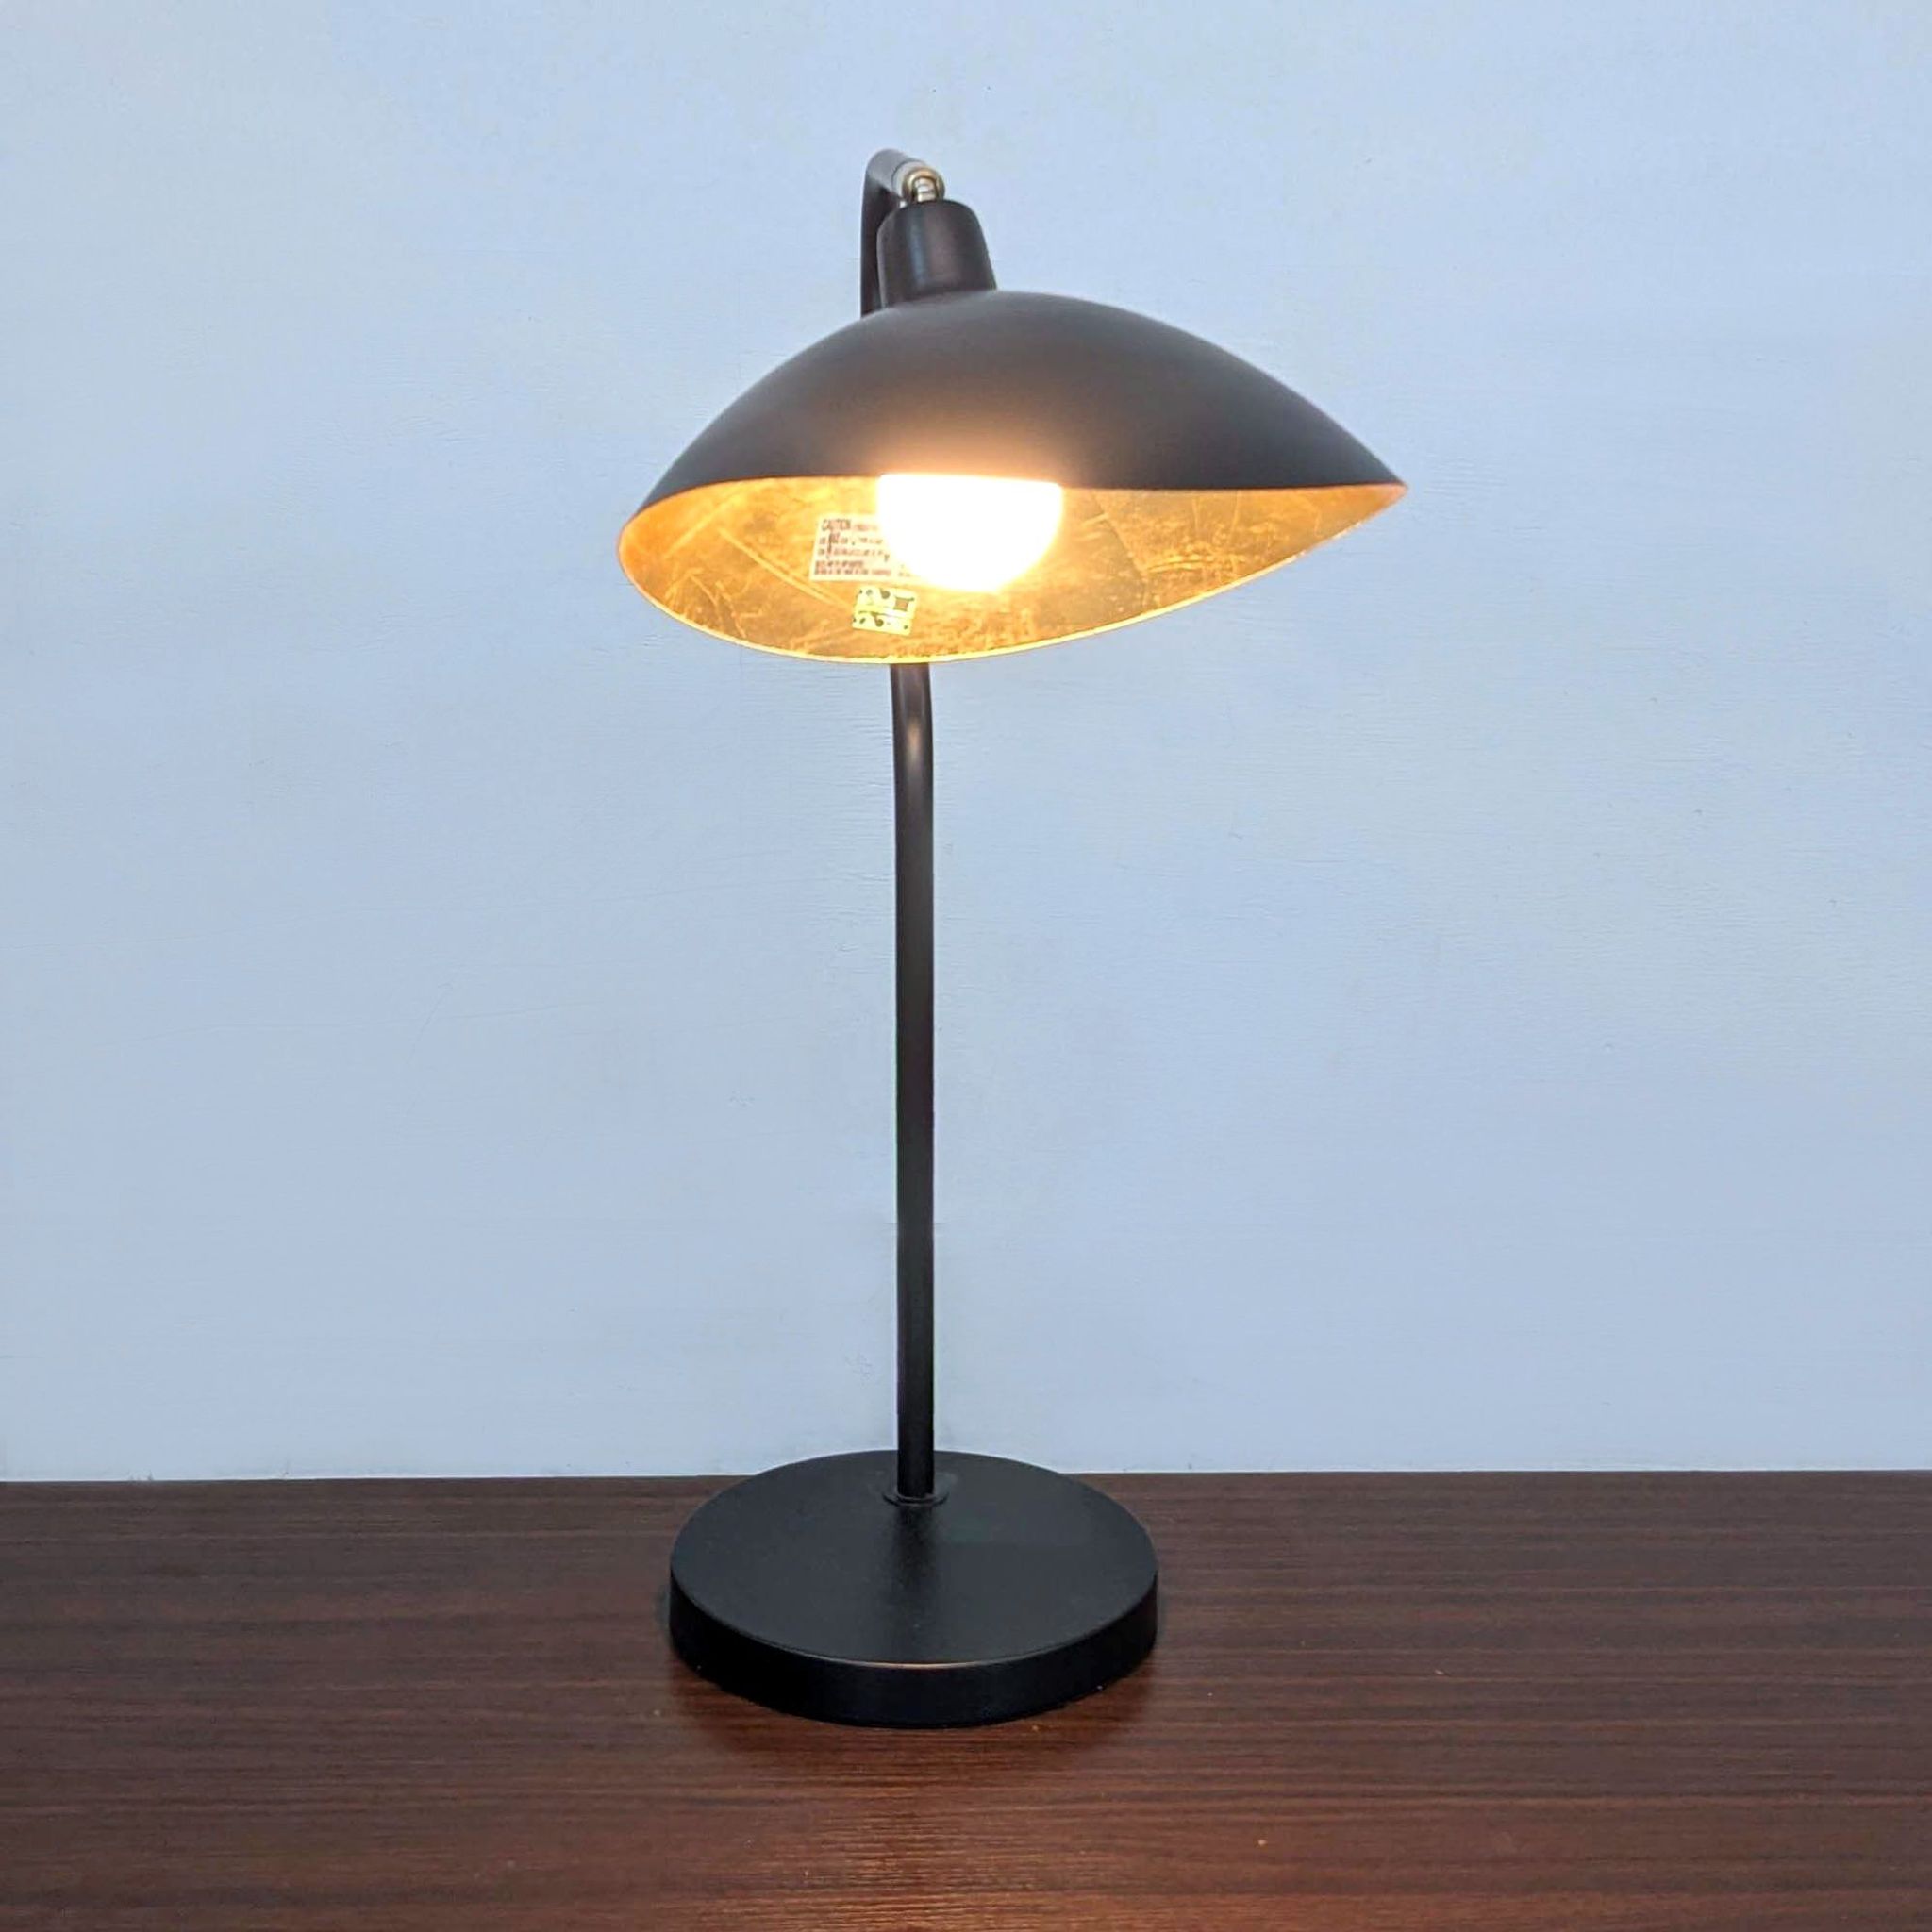 Black and gold Safavieh table lamp with mid-century design, illuminated, highlighting adjustable height feature.